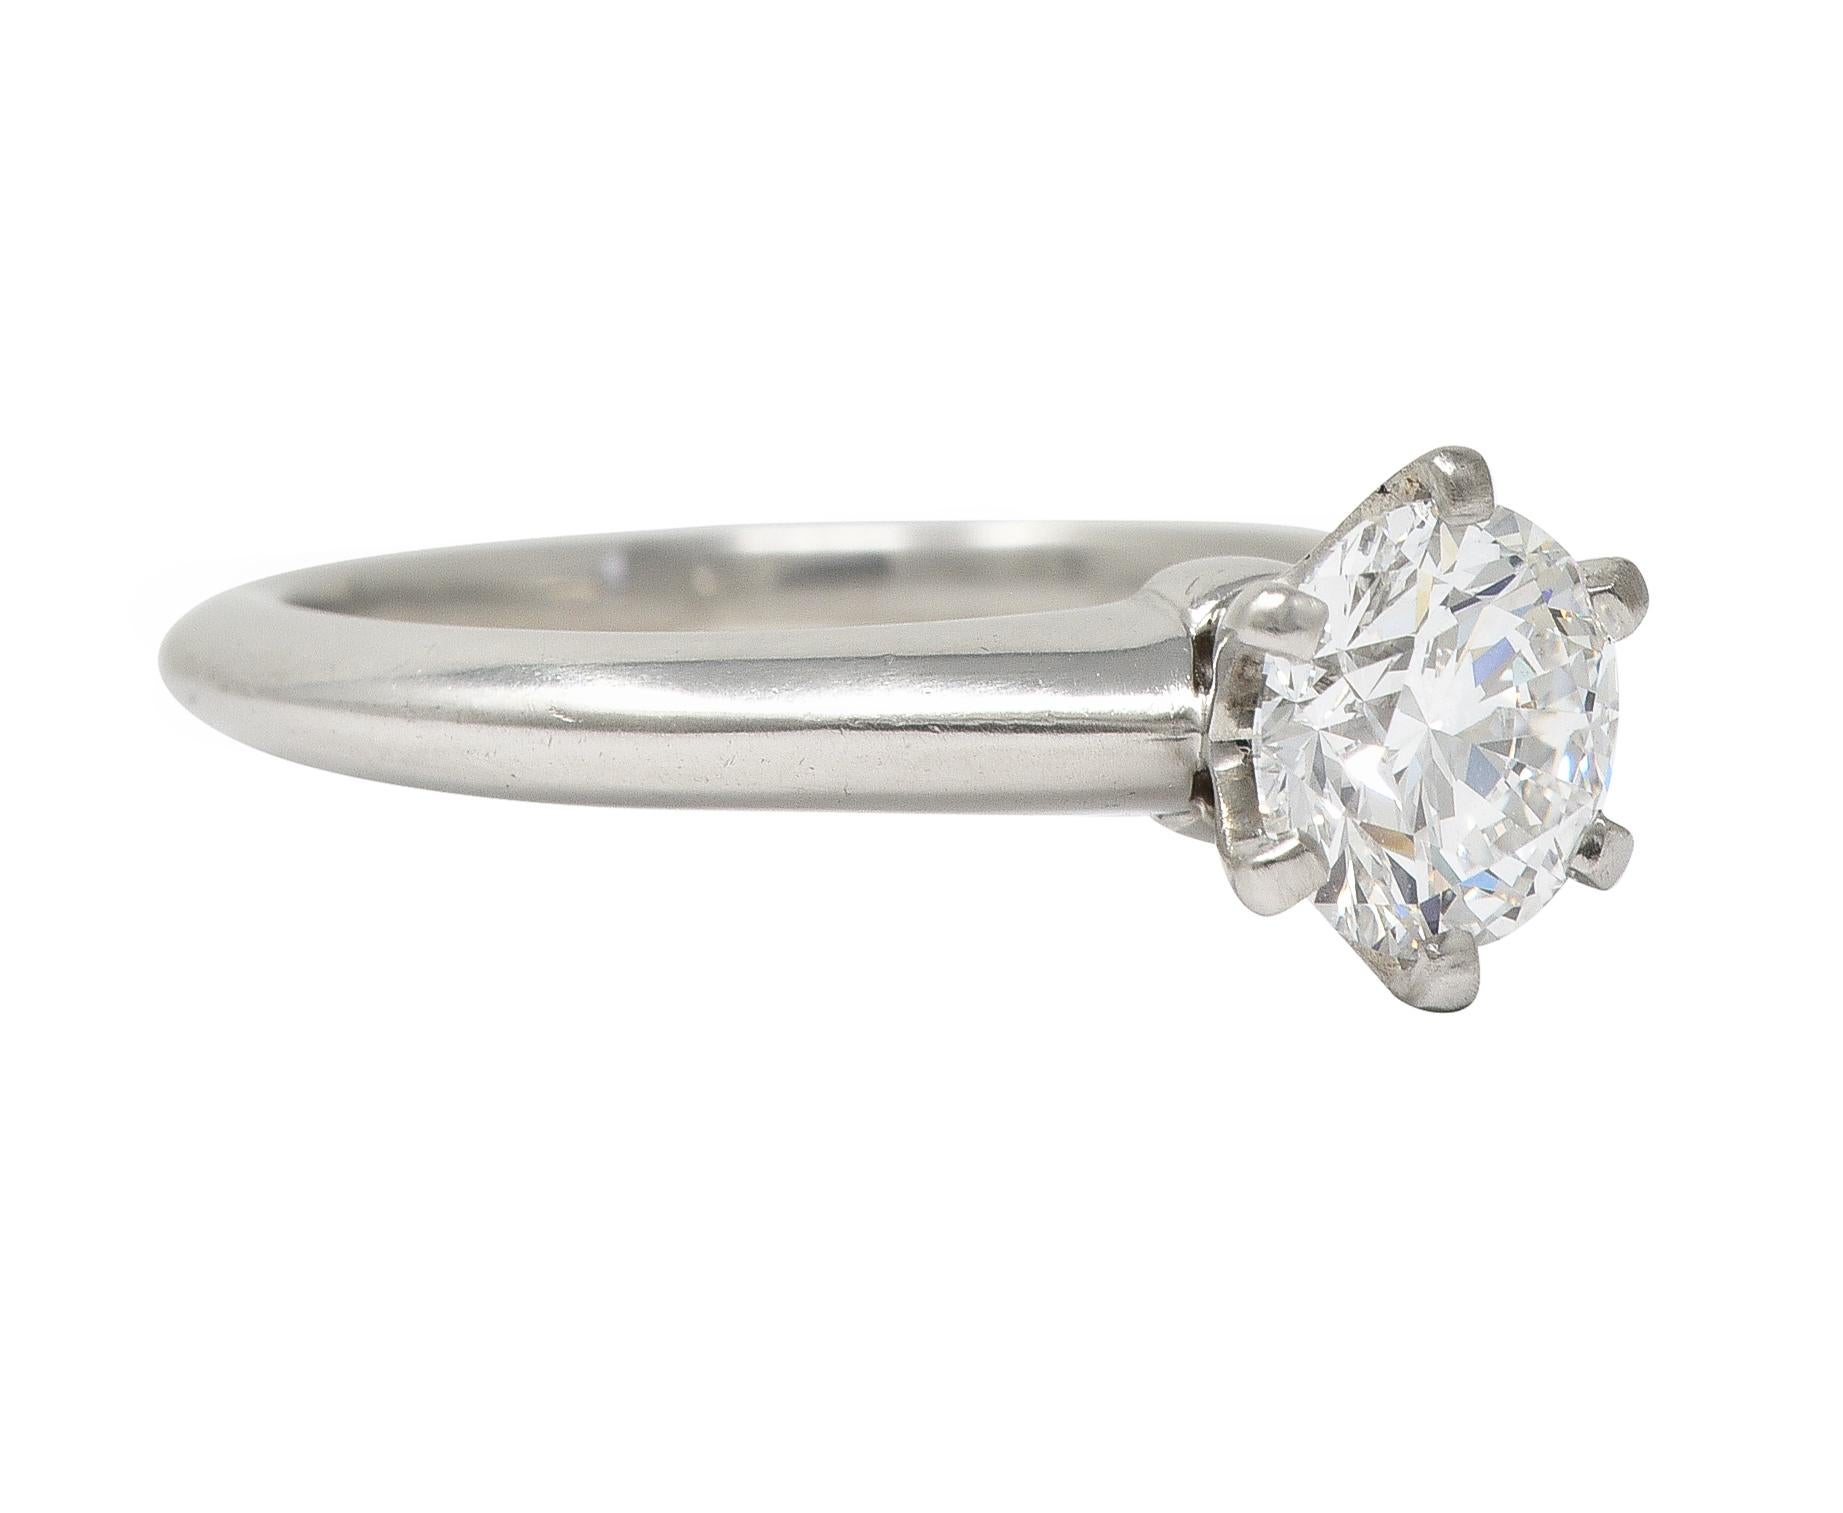 Centering a transitional cut diamond weighing 1.60 carats - D color with VS1 clarity
Prong set in a classic six-pronged Tiffany setting 
Completed by knife edge shank 
Stamped for platinum
Inscribed with carat weights
Numbered and fully signed for